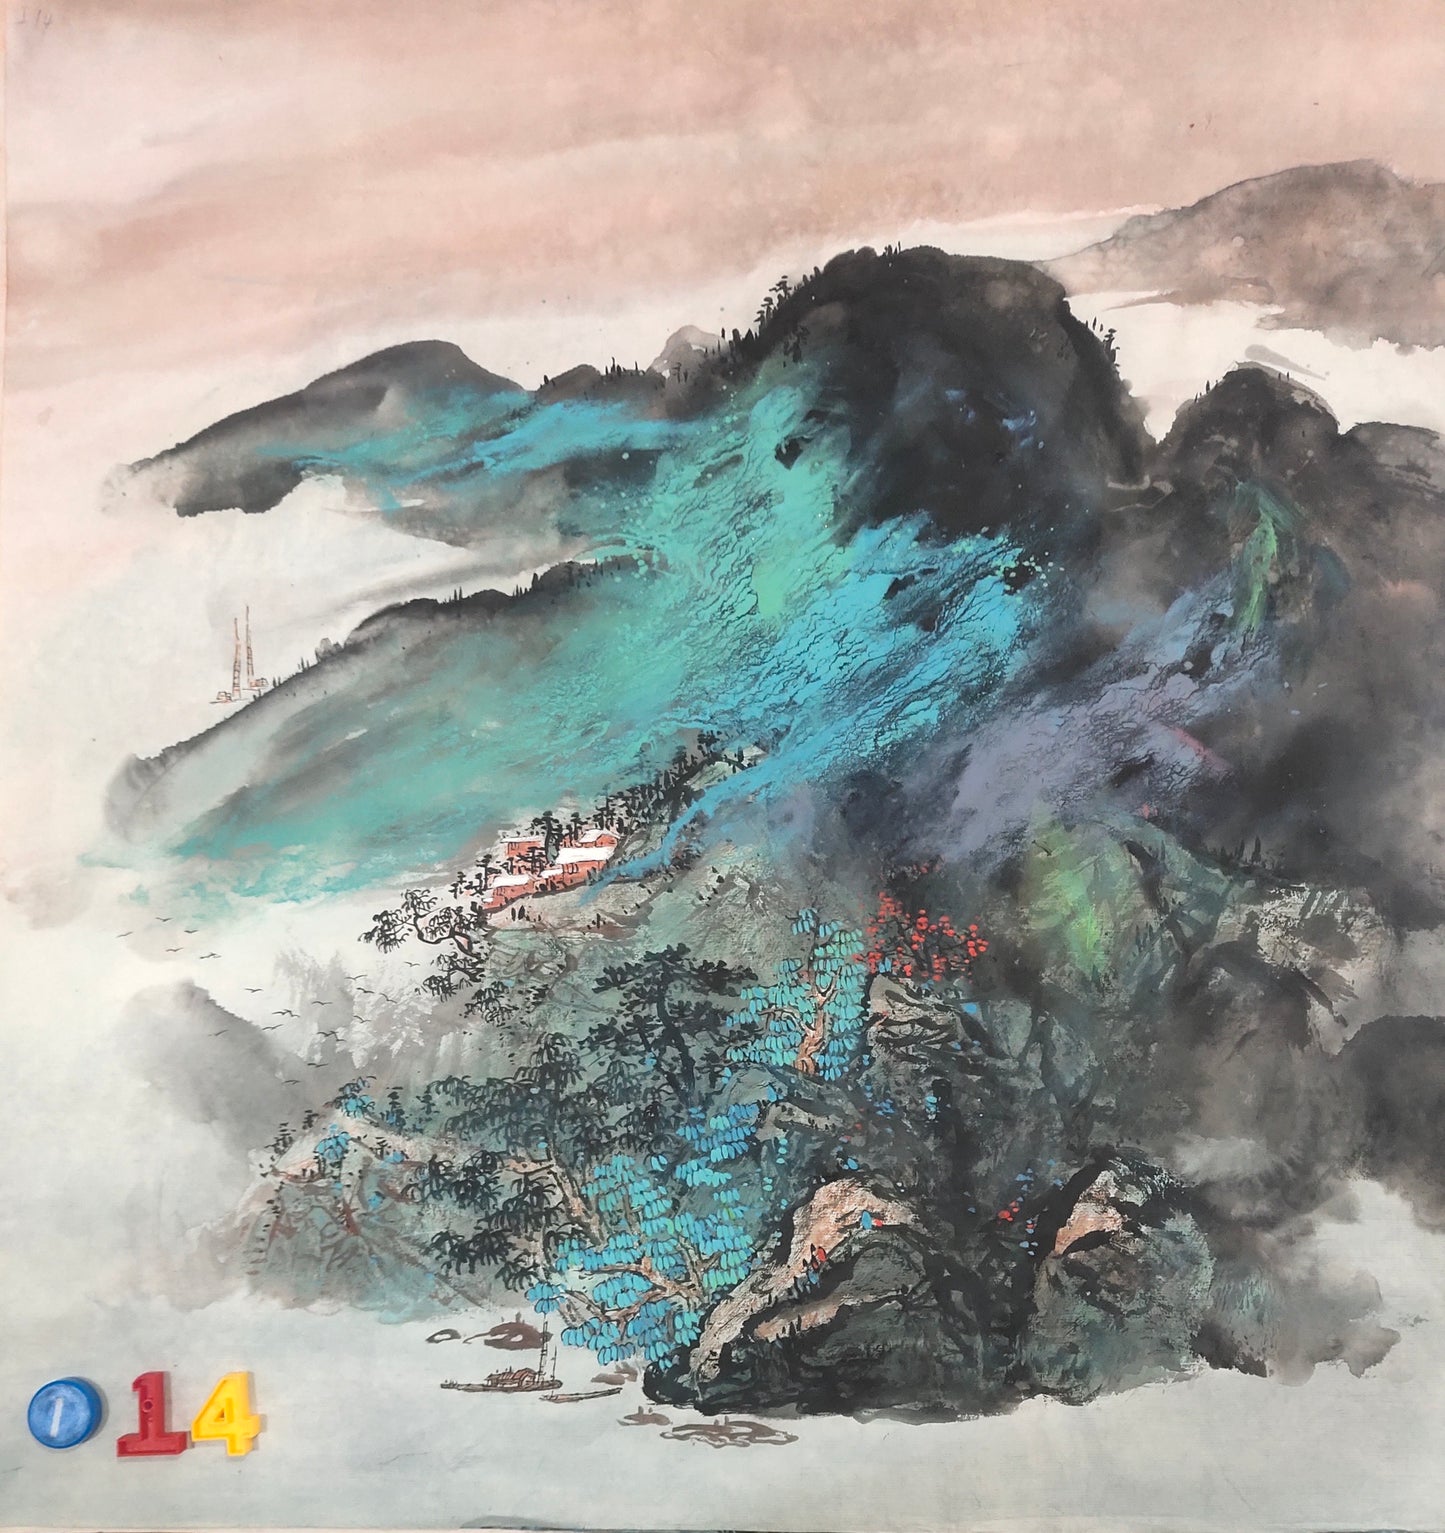 Chinese painting-Chinese landscape.  Colorful Mountains and clouds.  Living room decoration